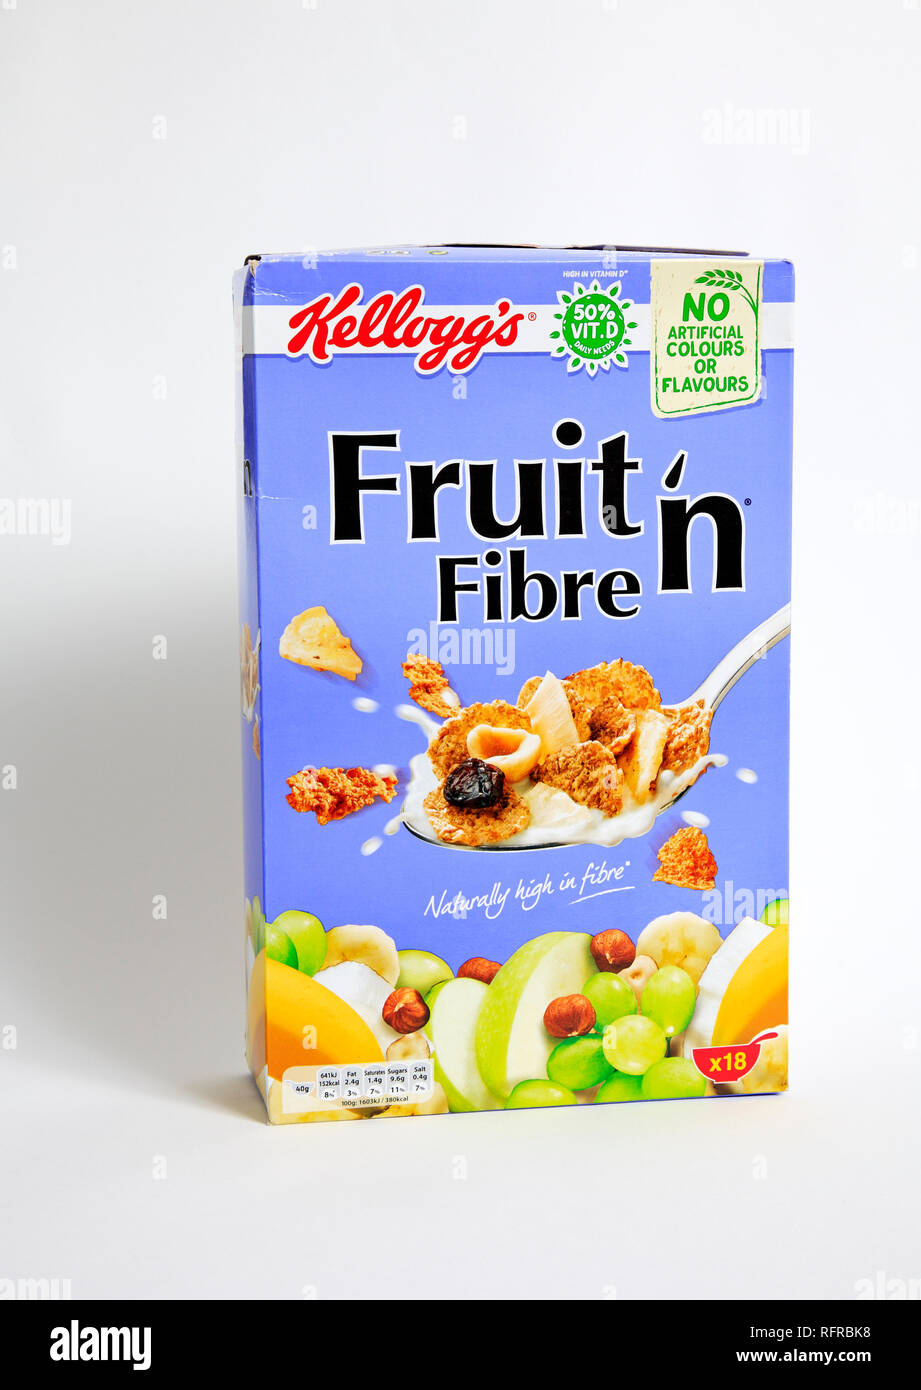 A packet of Kellog's Fruit 'n Fibre breakfast cereal. Stock Photo